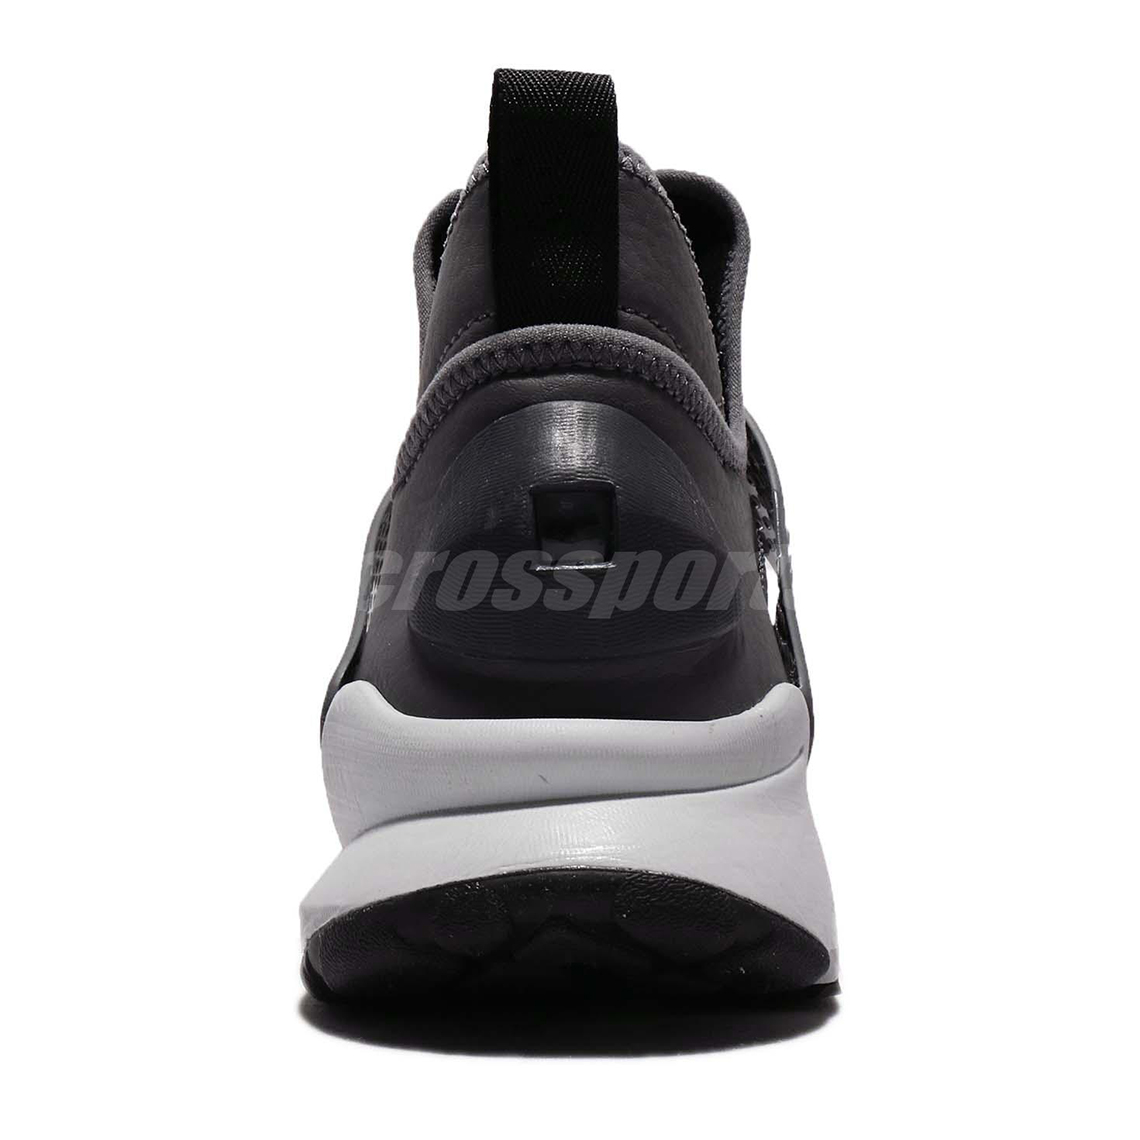 Nike Sock Dart Mid Anthracite 924454 003 Available Now 5